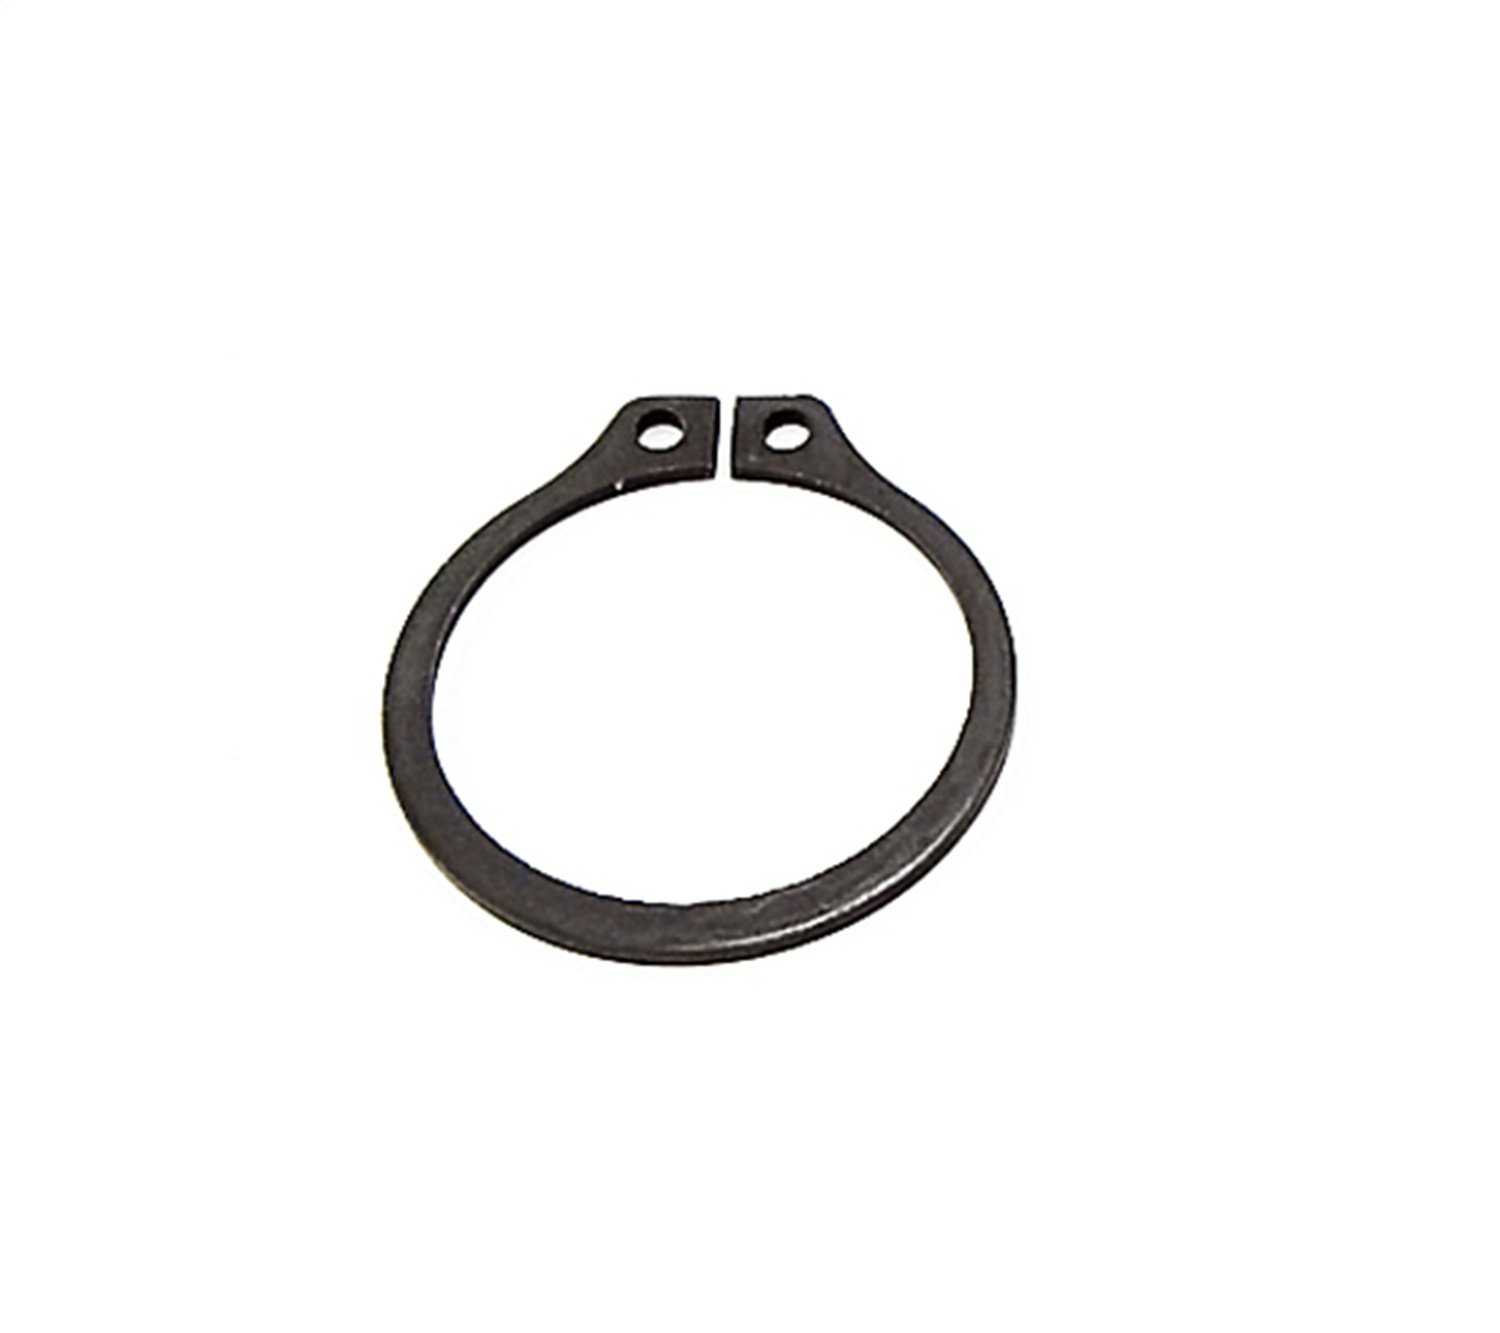 This outer axle snap ring from Omix-ADA for Dana 30 front axle found in 72-86 Jeep CJ models.